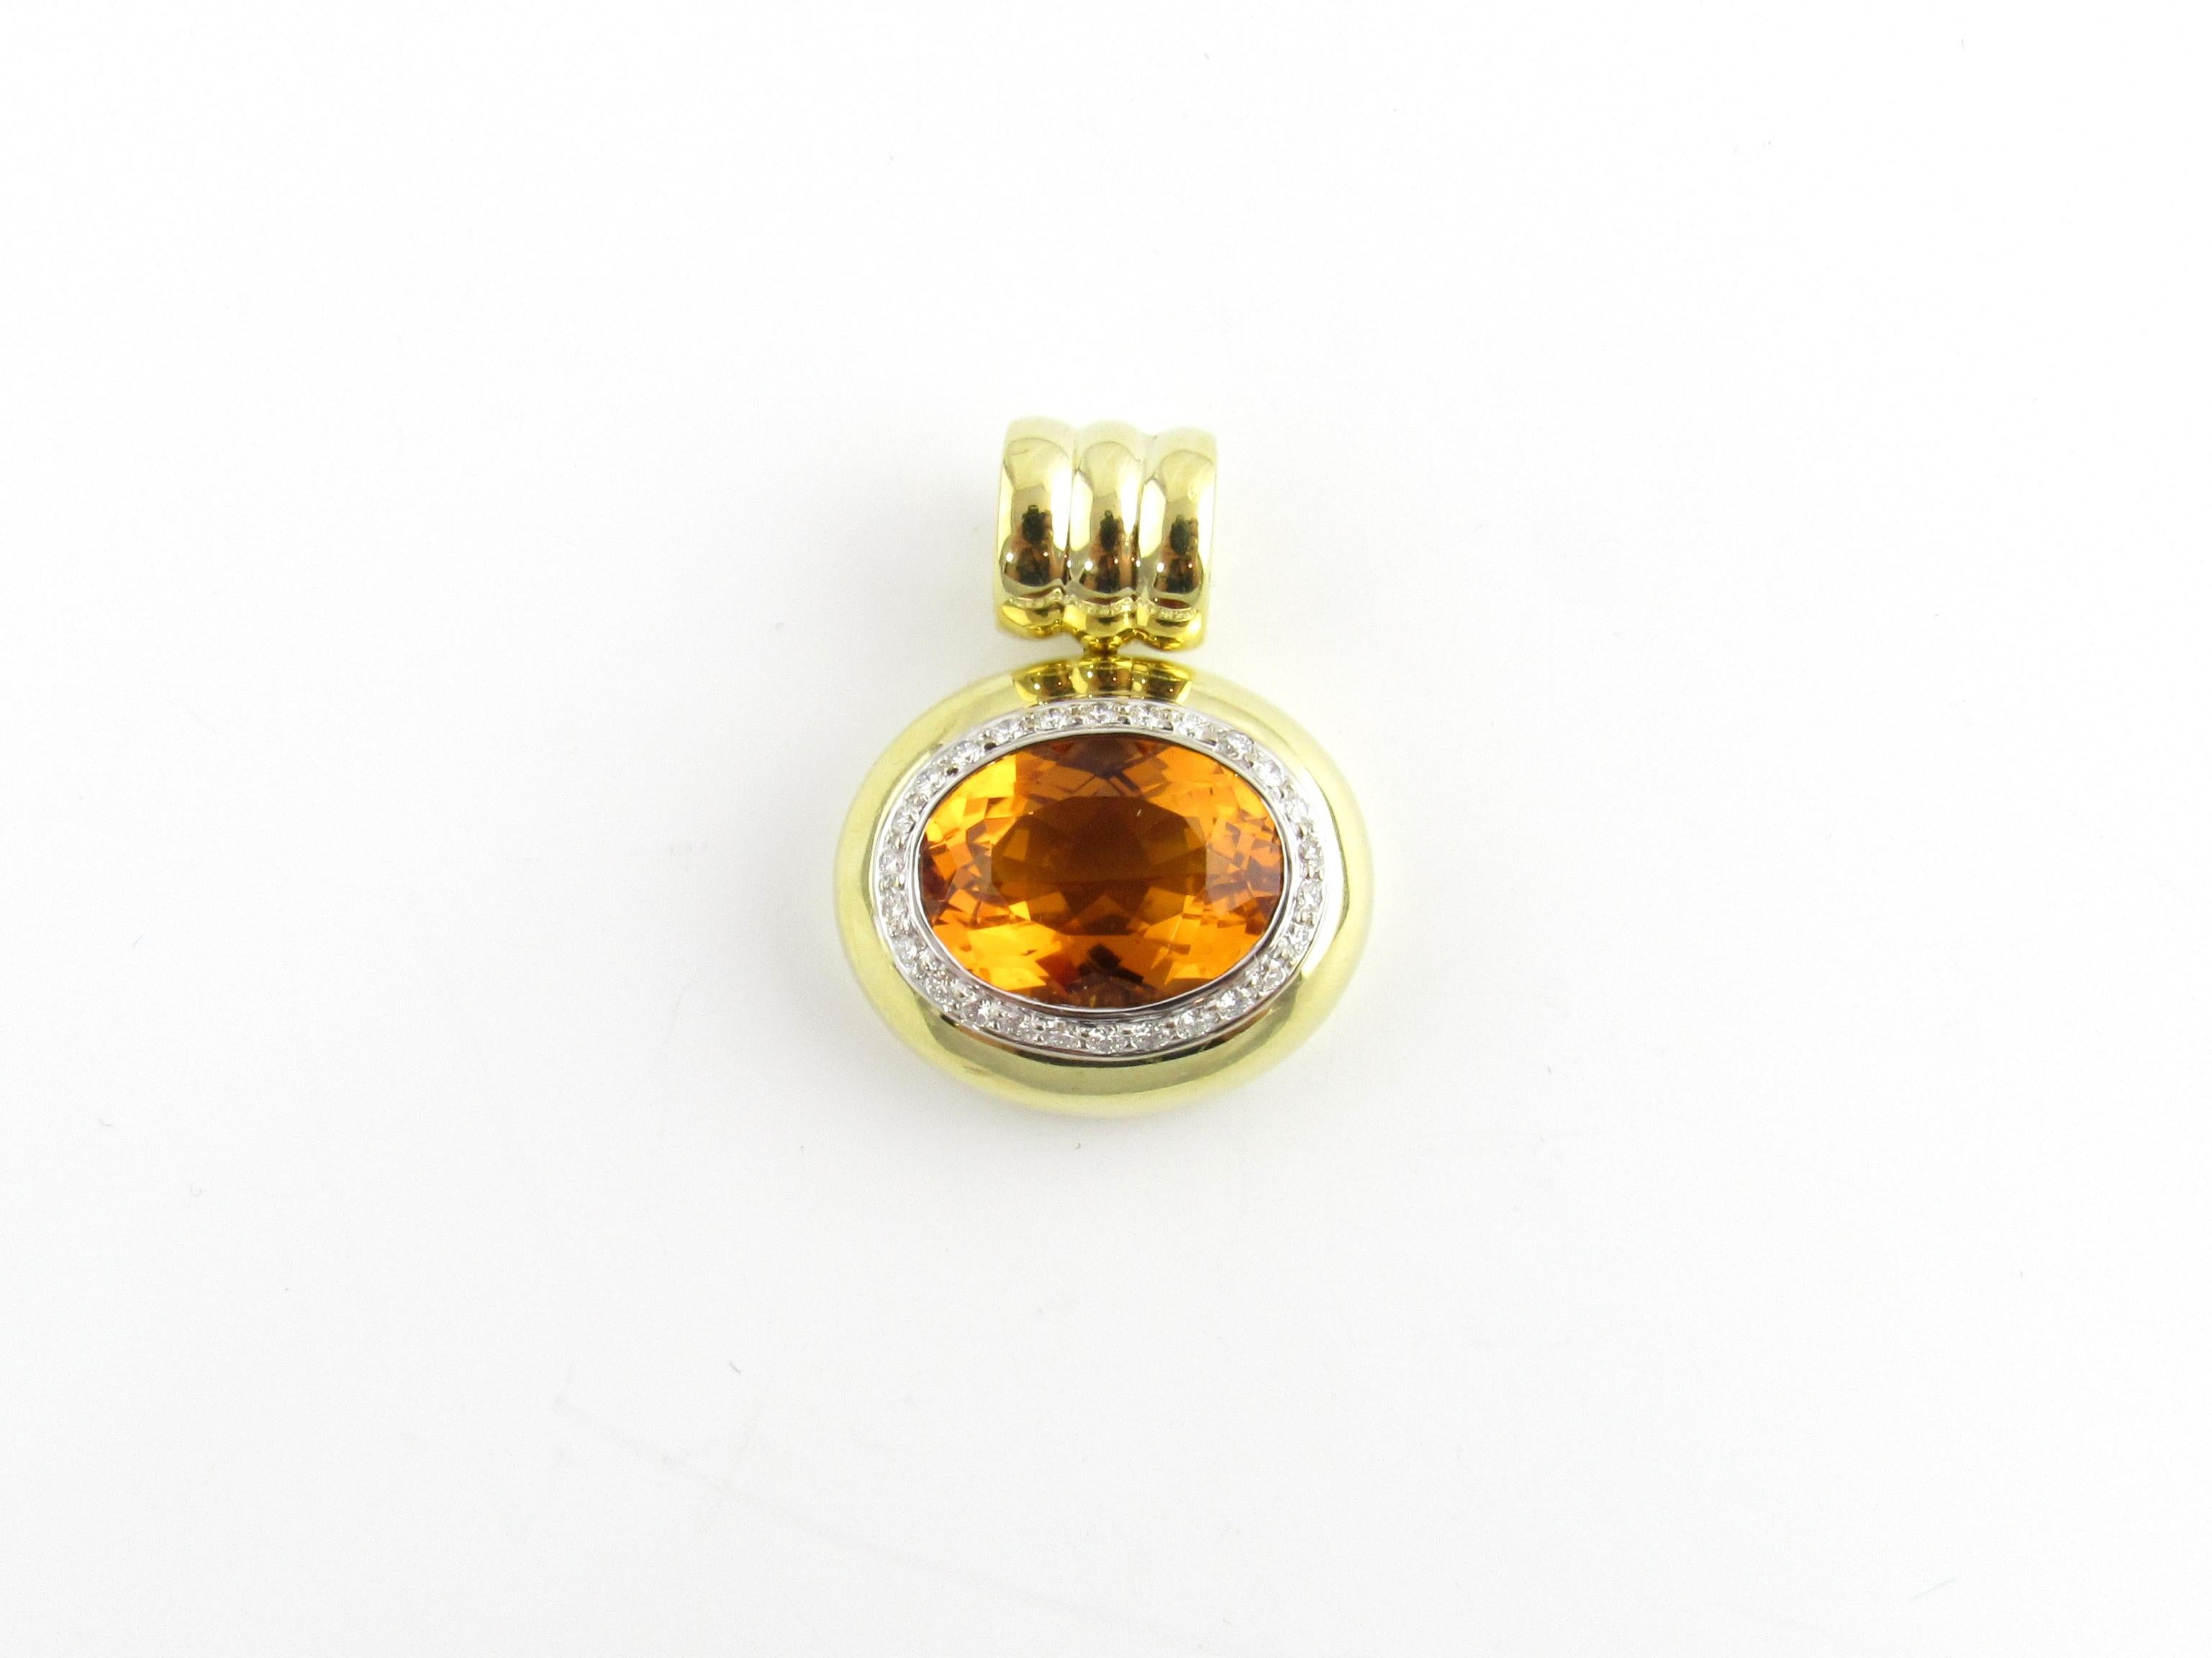 Vintage 18 Karat Yellow Gold Citrine and Diamond Pendant-

This lovely pendant features one 10.54cts oval citrine (17.16mm x 12.82mm x 8.58mm) surrounded by 27 round brilliant cut diamonds and set in beautifully detailed 18K yellow gold.

Citrine is